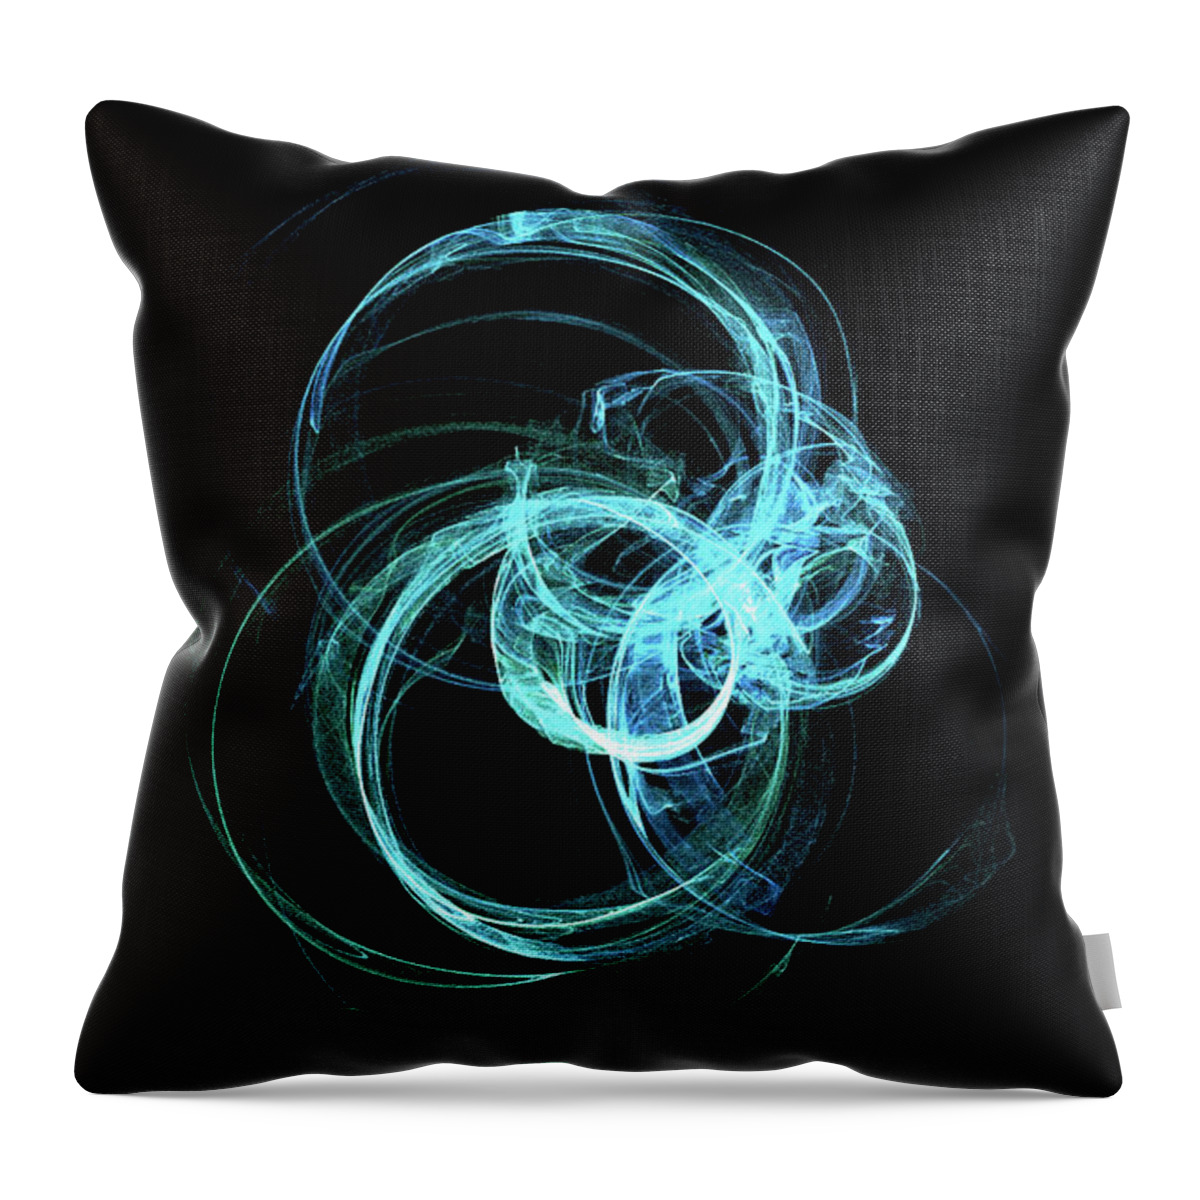 Kinetic Throw Pillow featuring the digital art Kinetic09 by Andrew Selby